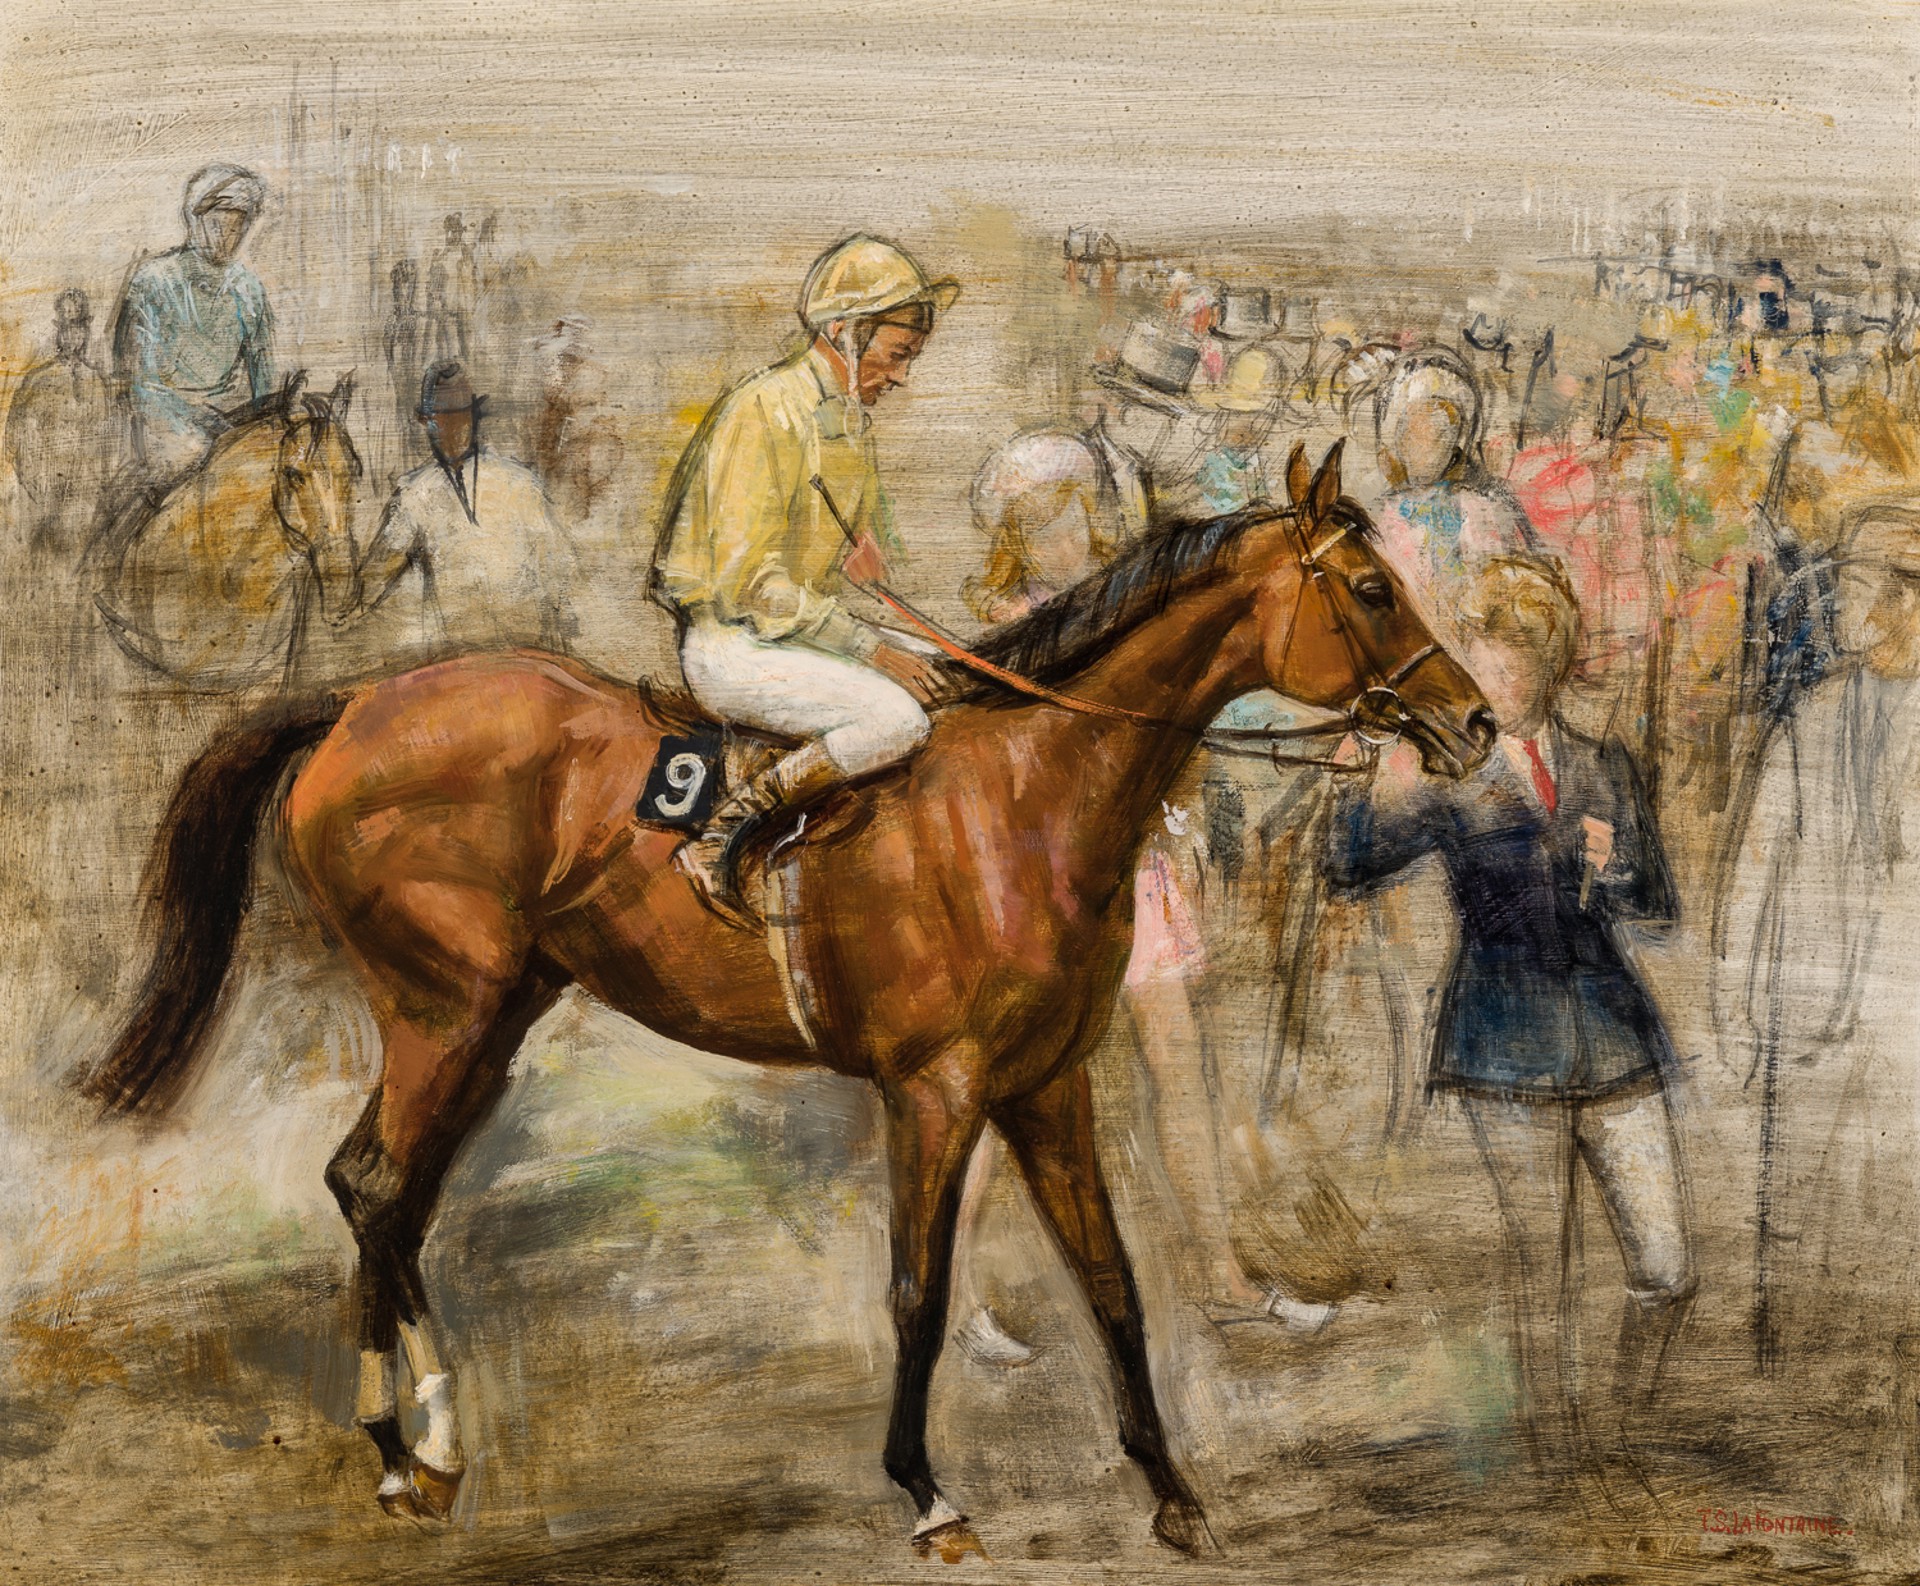 PARK TOP WITH LESTER PIGGOTT UP IN THE COLORS OF THE DUKE OF DEVONSHIRE by Thomas Sherwood La Fontaine